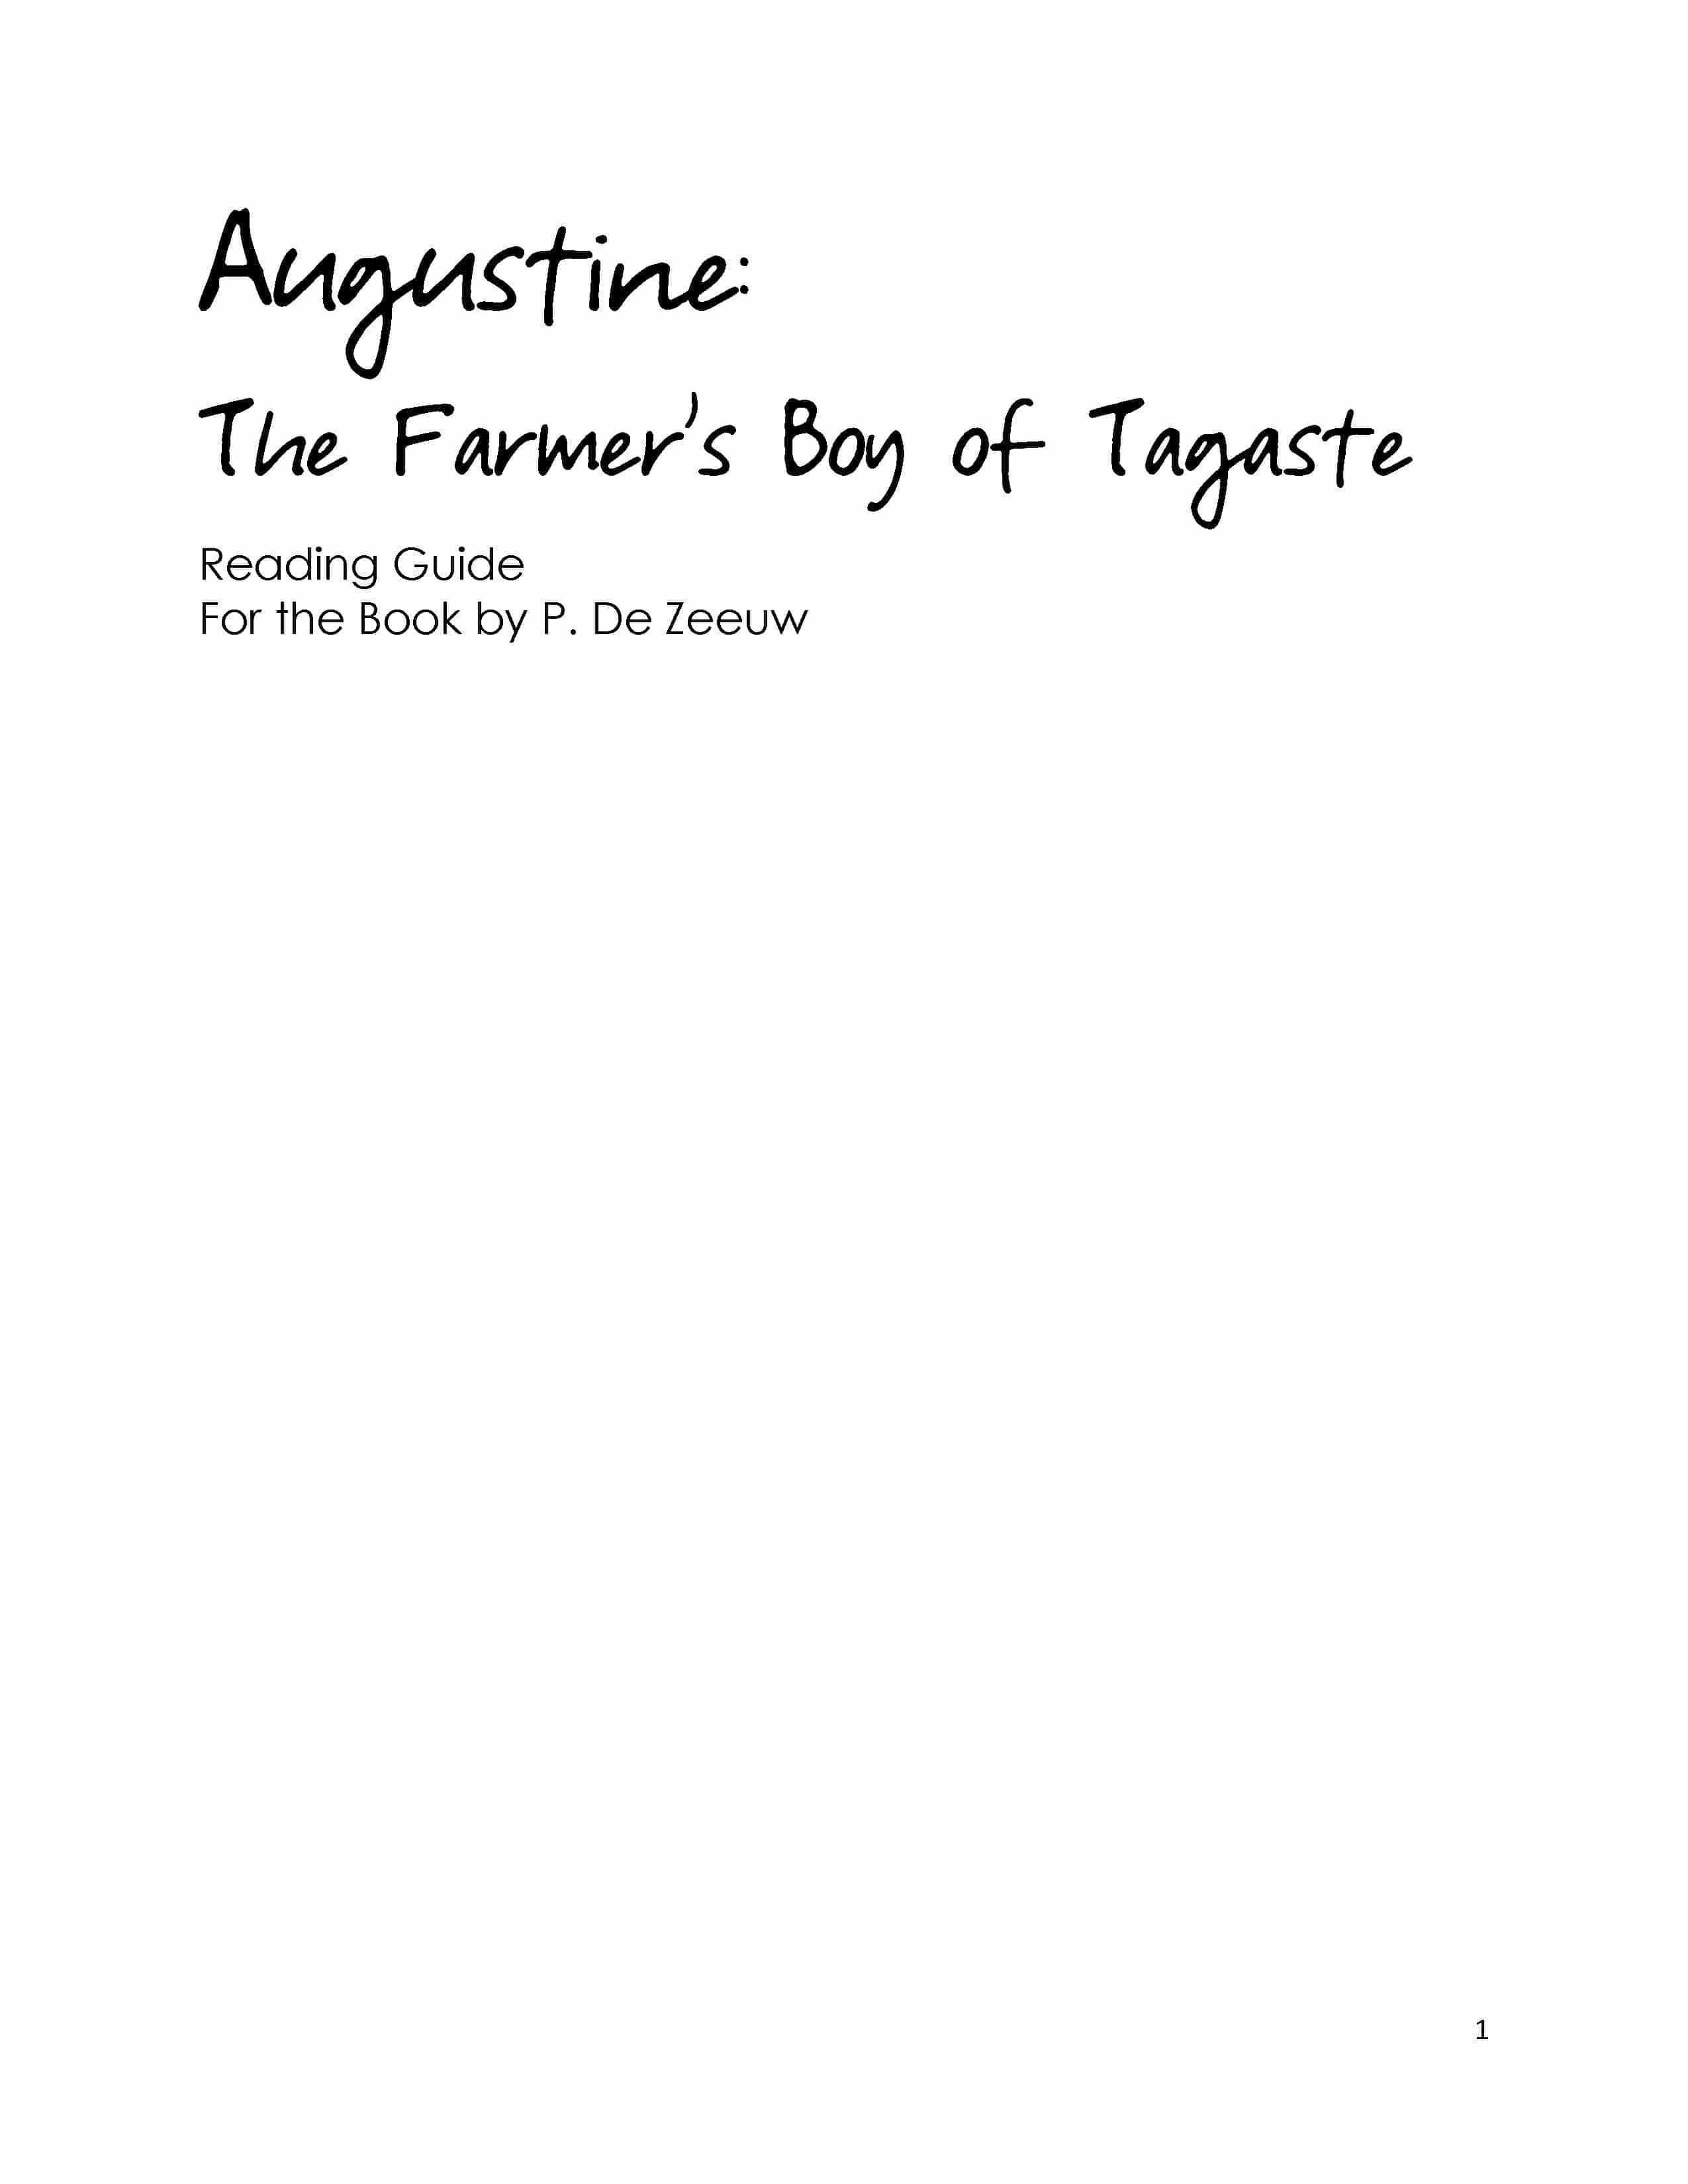 Augustine: The Farmer's Boy of Tagaste - Reading Guide (Download)